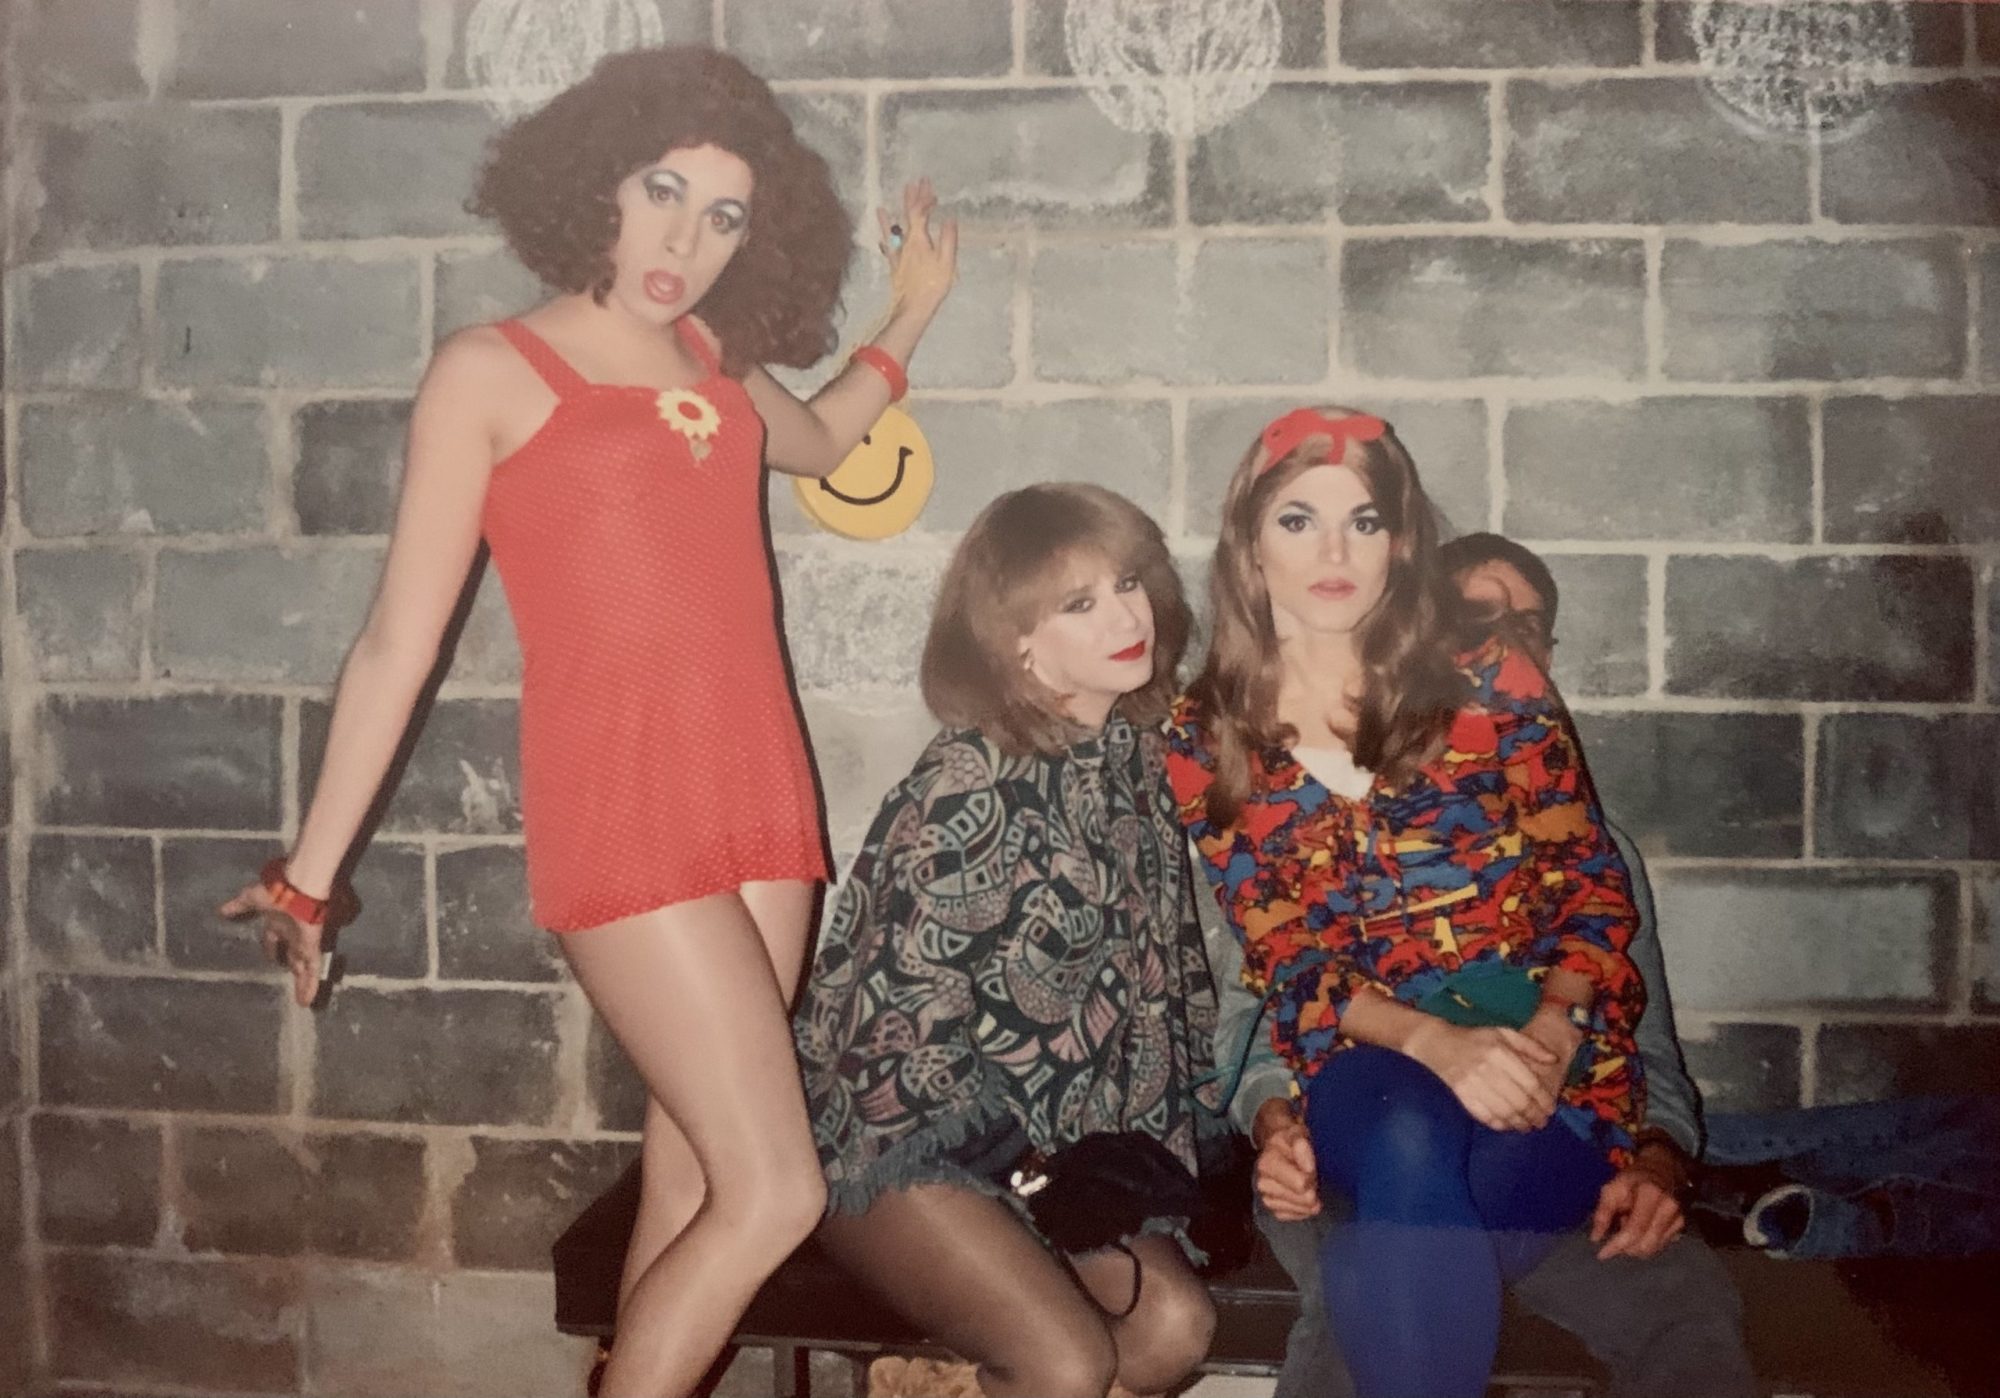 A photo of three individuals dressed colorfully — bold, metallic makeup and bright red clothing —against a gray brick wall.